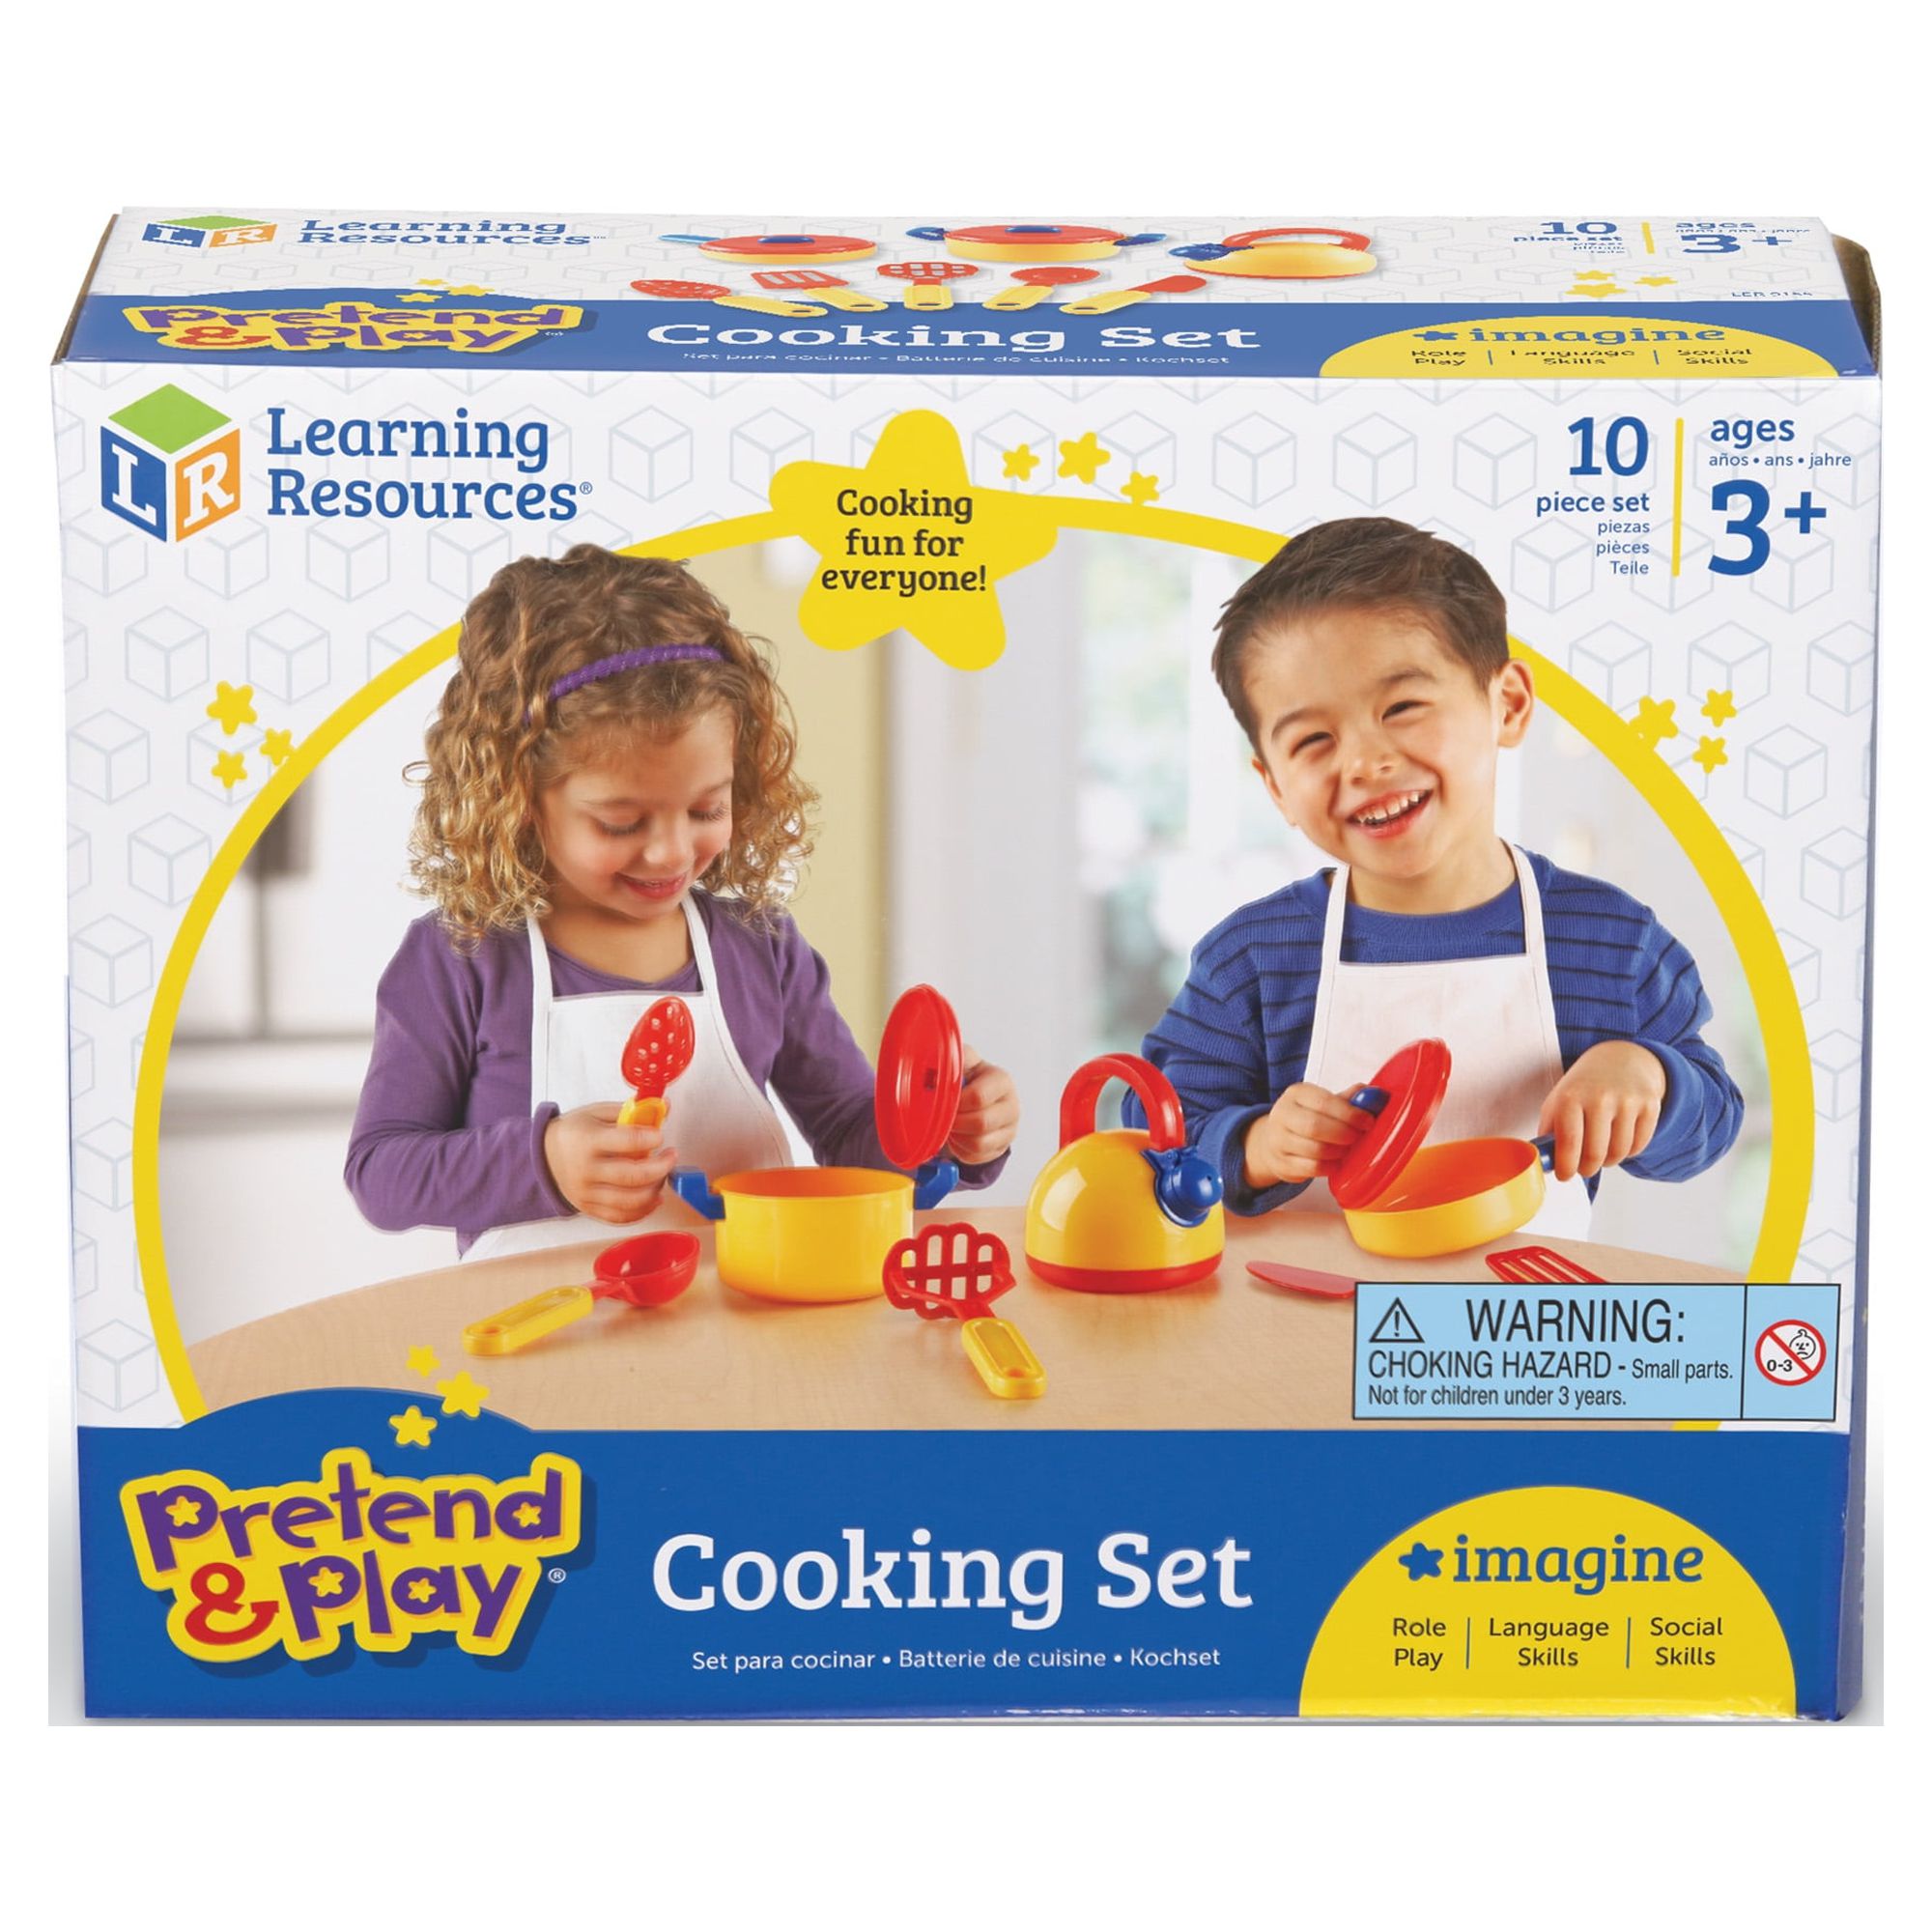 Learning Resources Pretend & Play Cooking Set - image 1 of 6